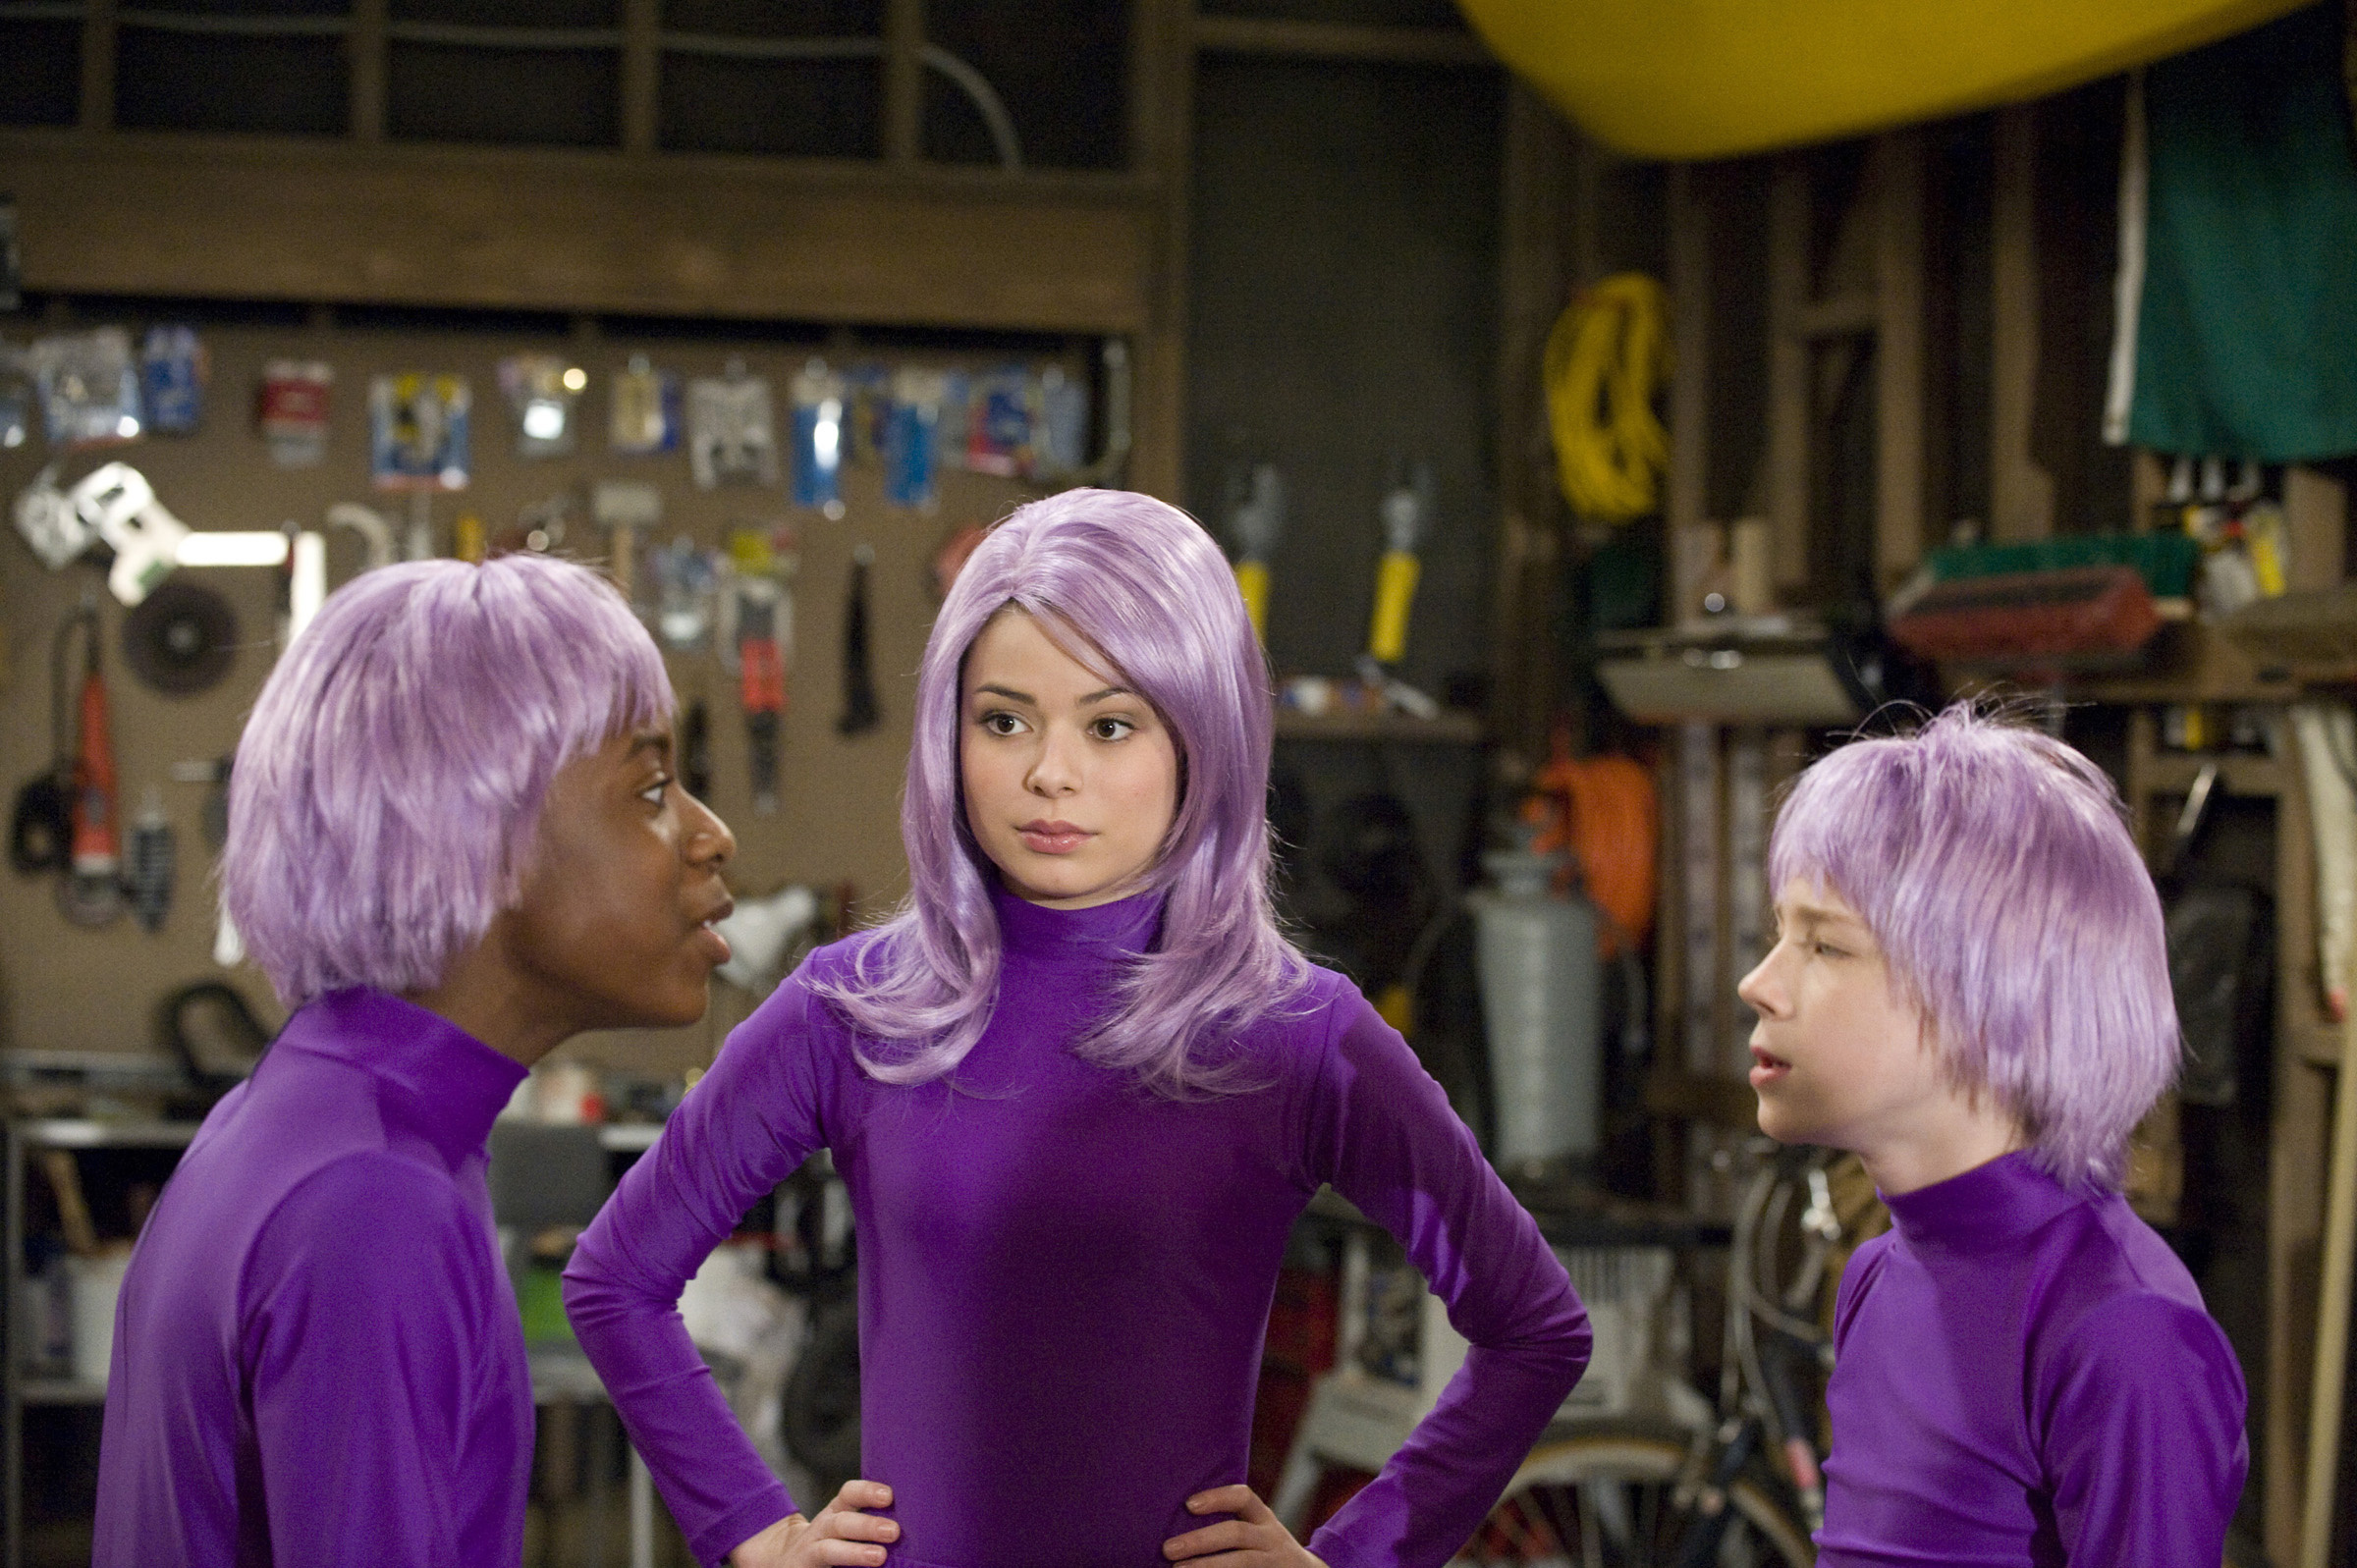 iCarly TV show, Funny moments, Fan-made images, Free photos, 2400x1600 HD Desktop